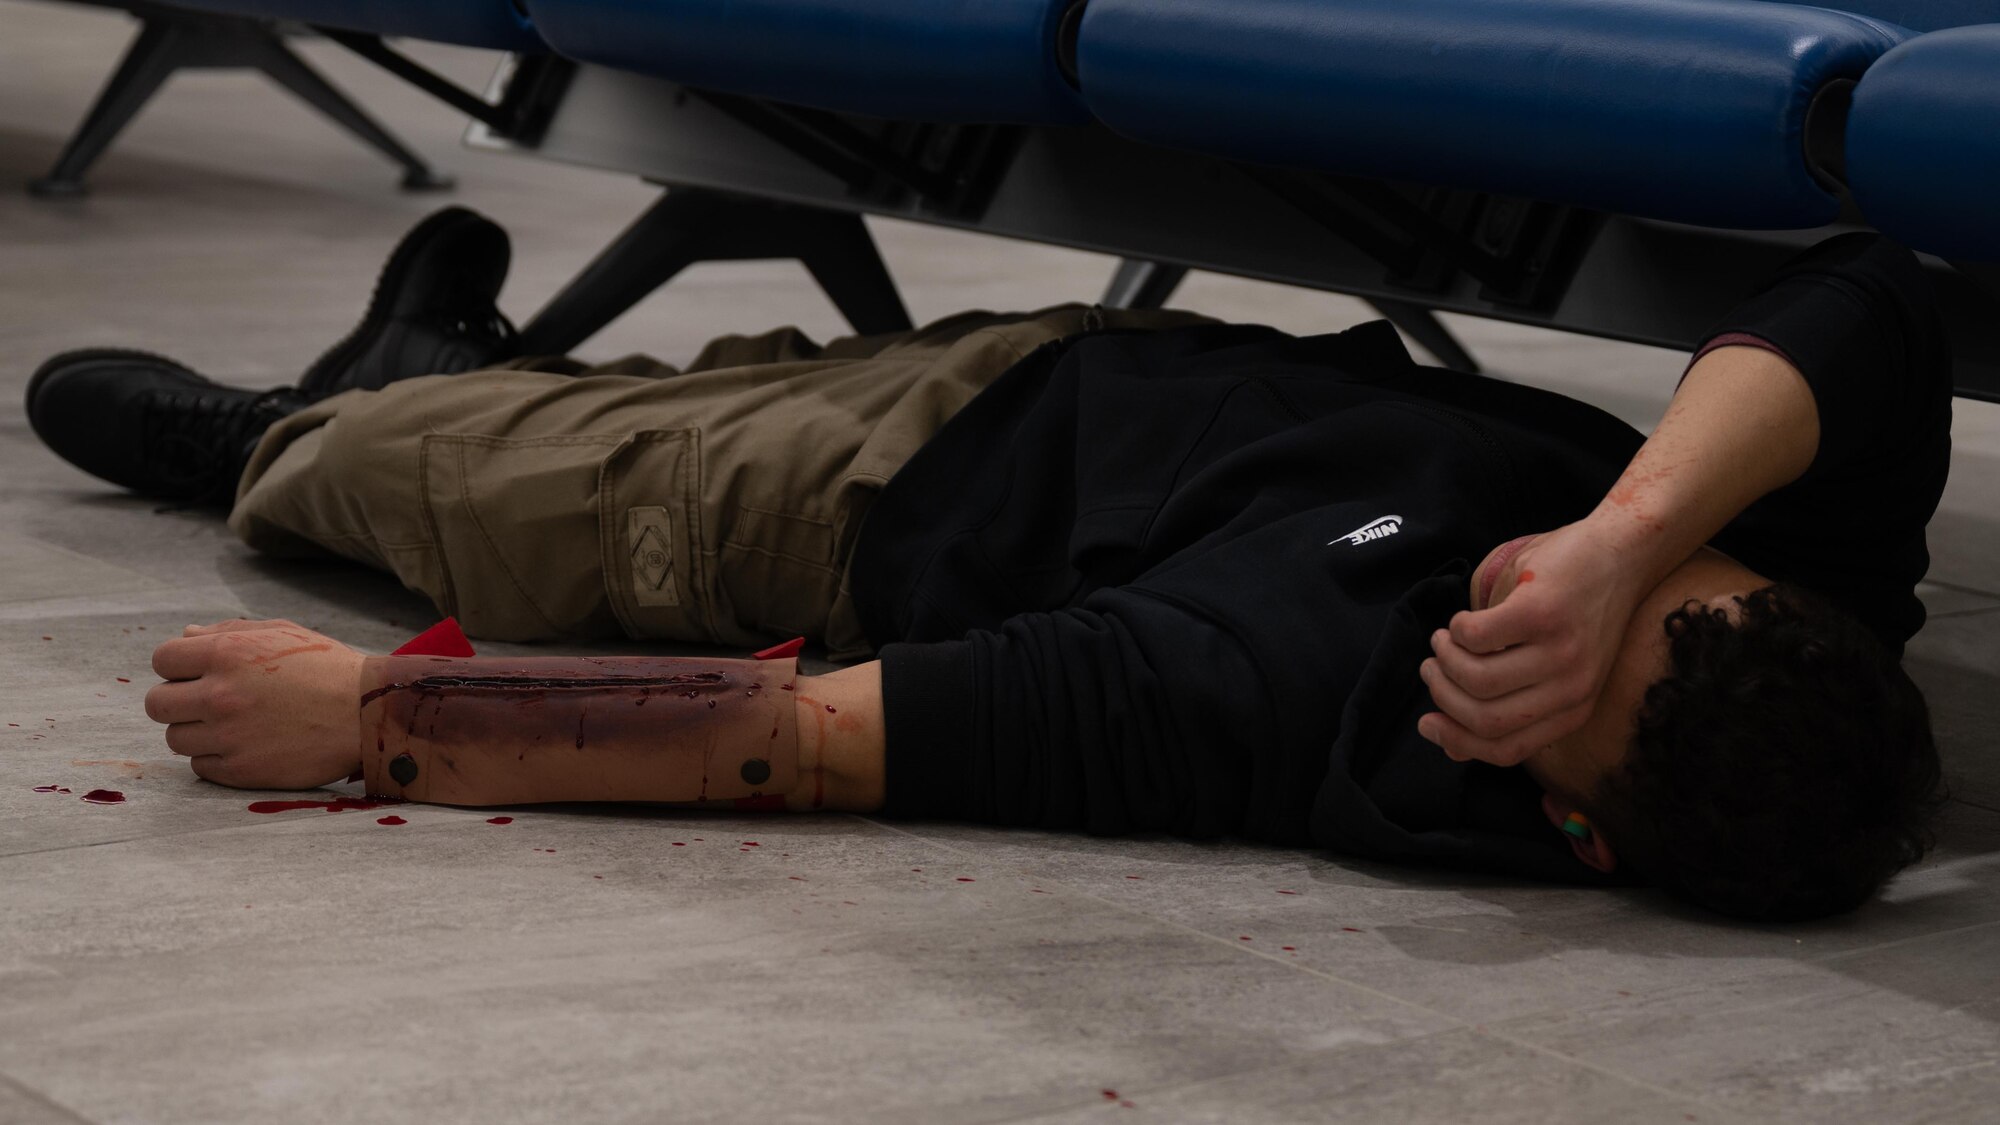 A simulated victim with injuries lays on the floor.